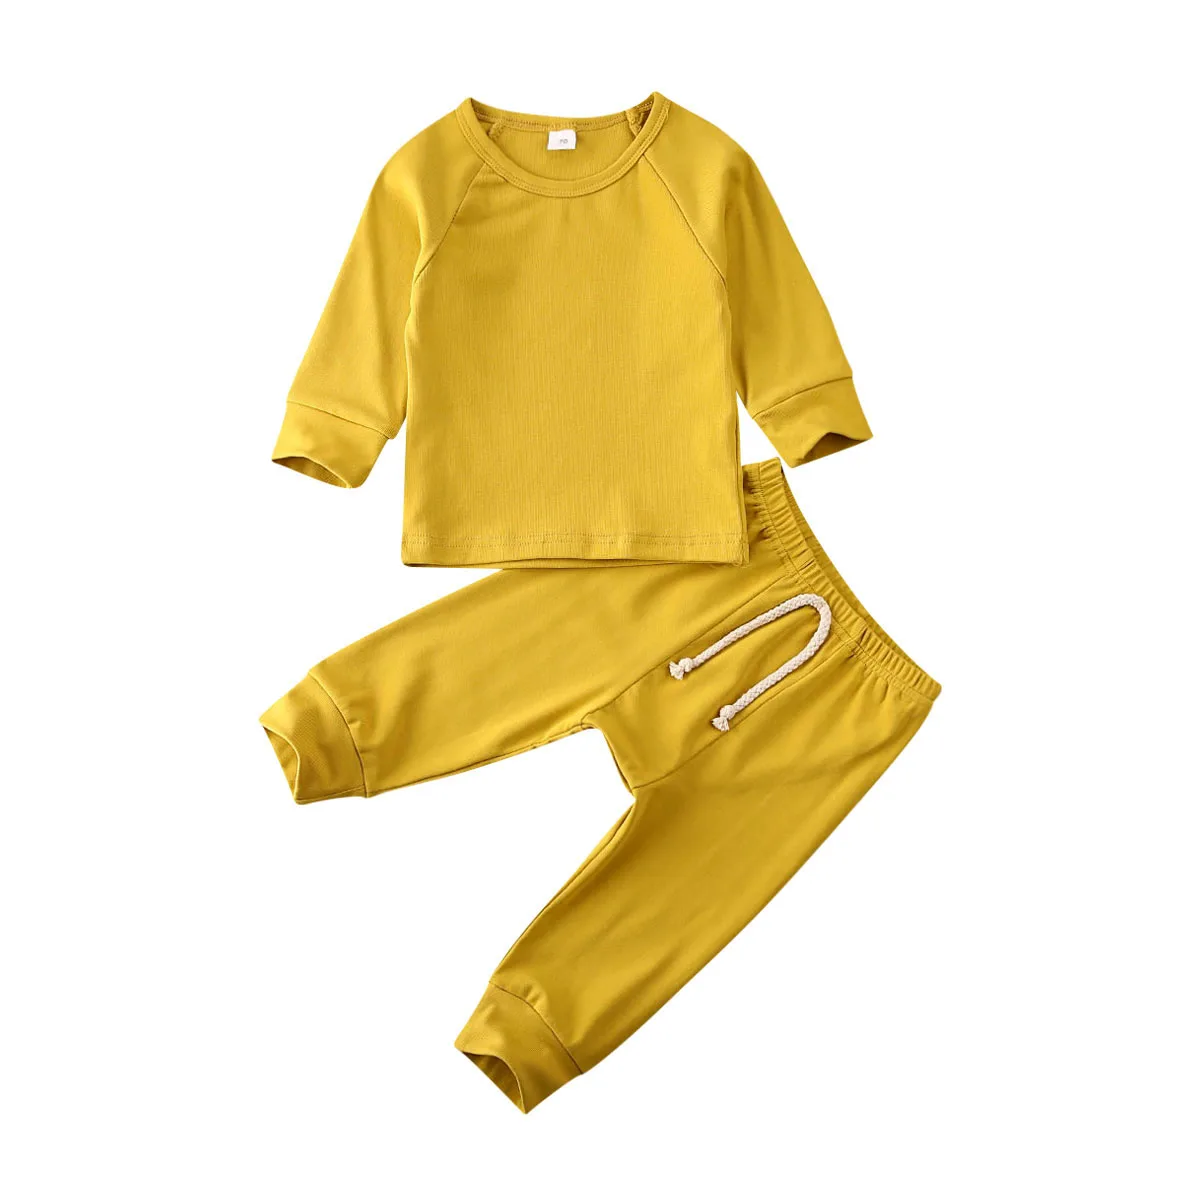 

Baby Spring Autumn Clothing Infant Baby Girl Boy Unisex Solid Tracksuit Outfits Long Sleeve Top+Pant Clothes 2Pcs Set 6M-4T